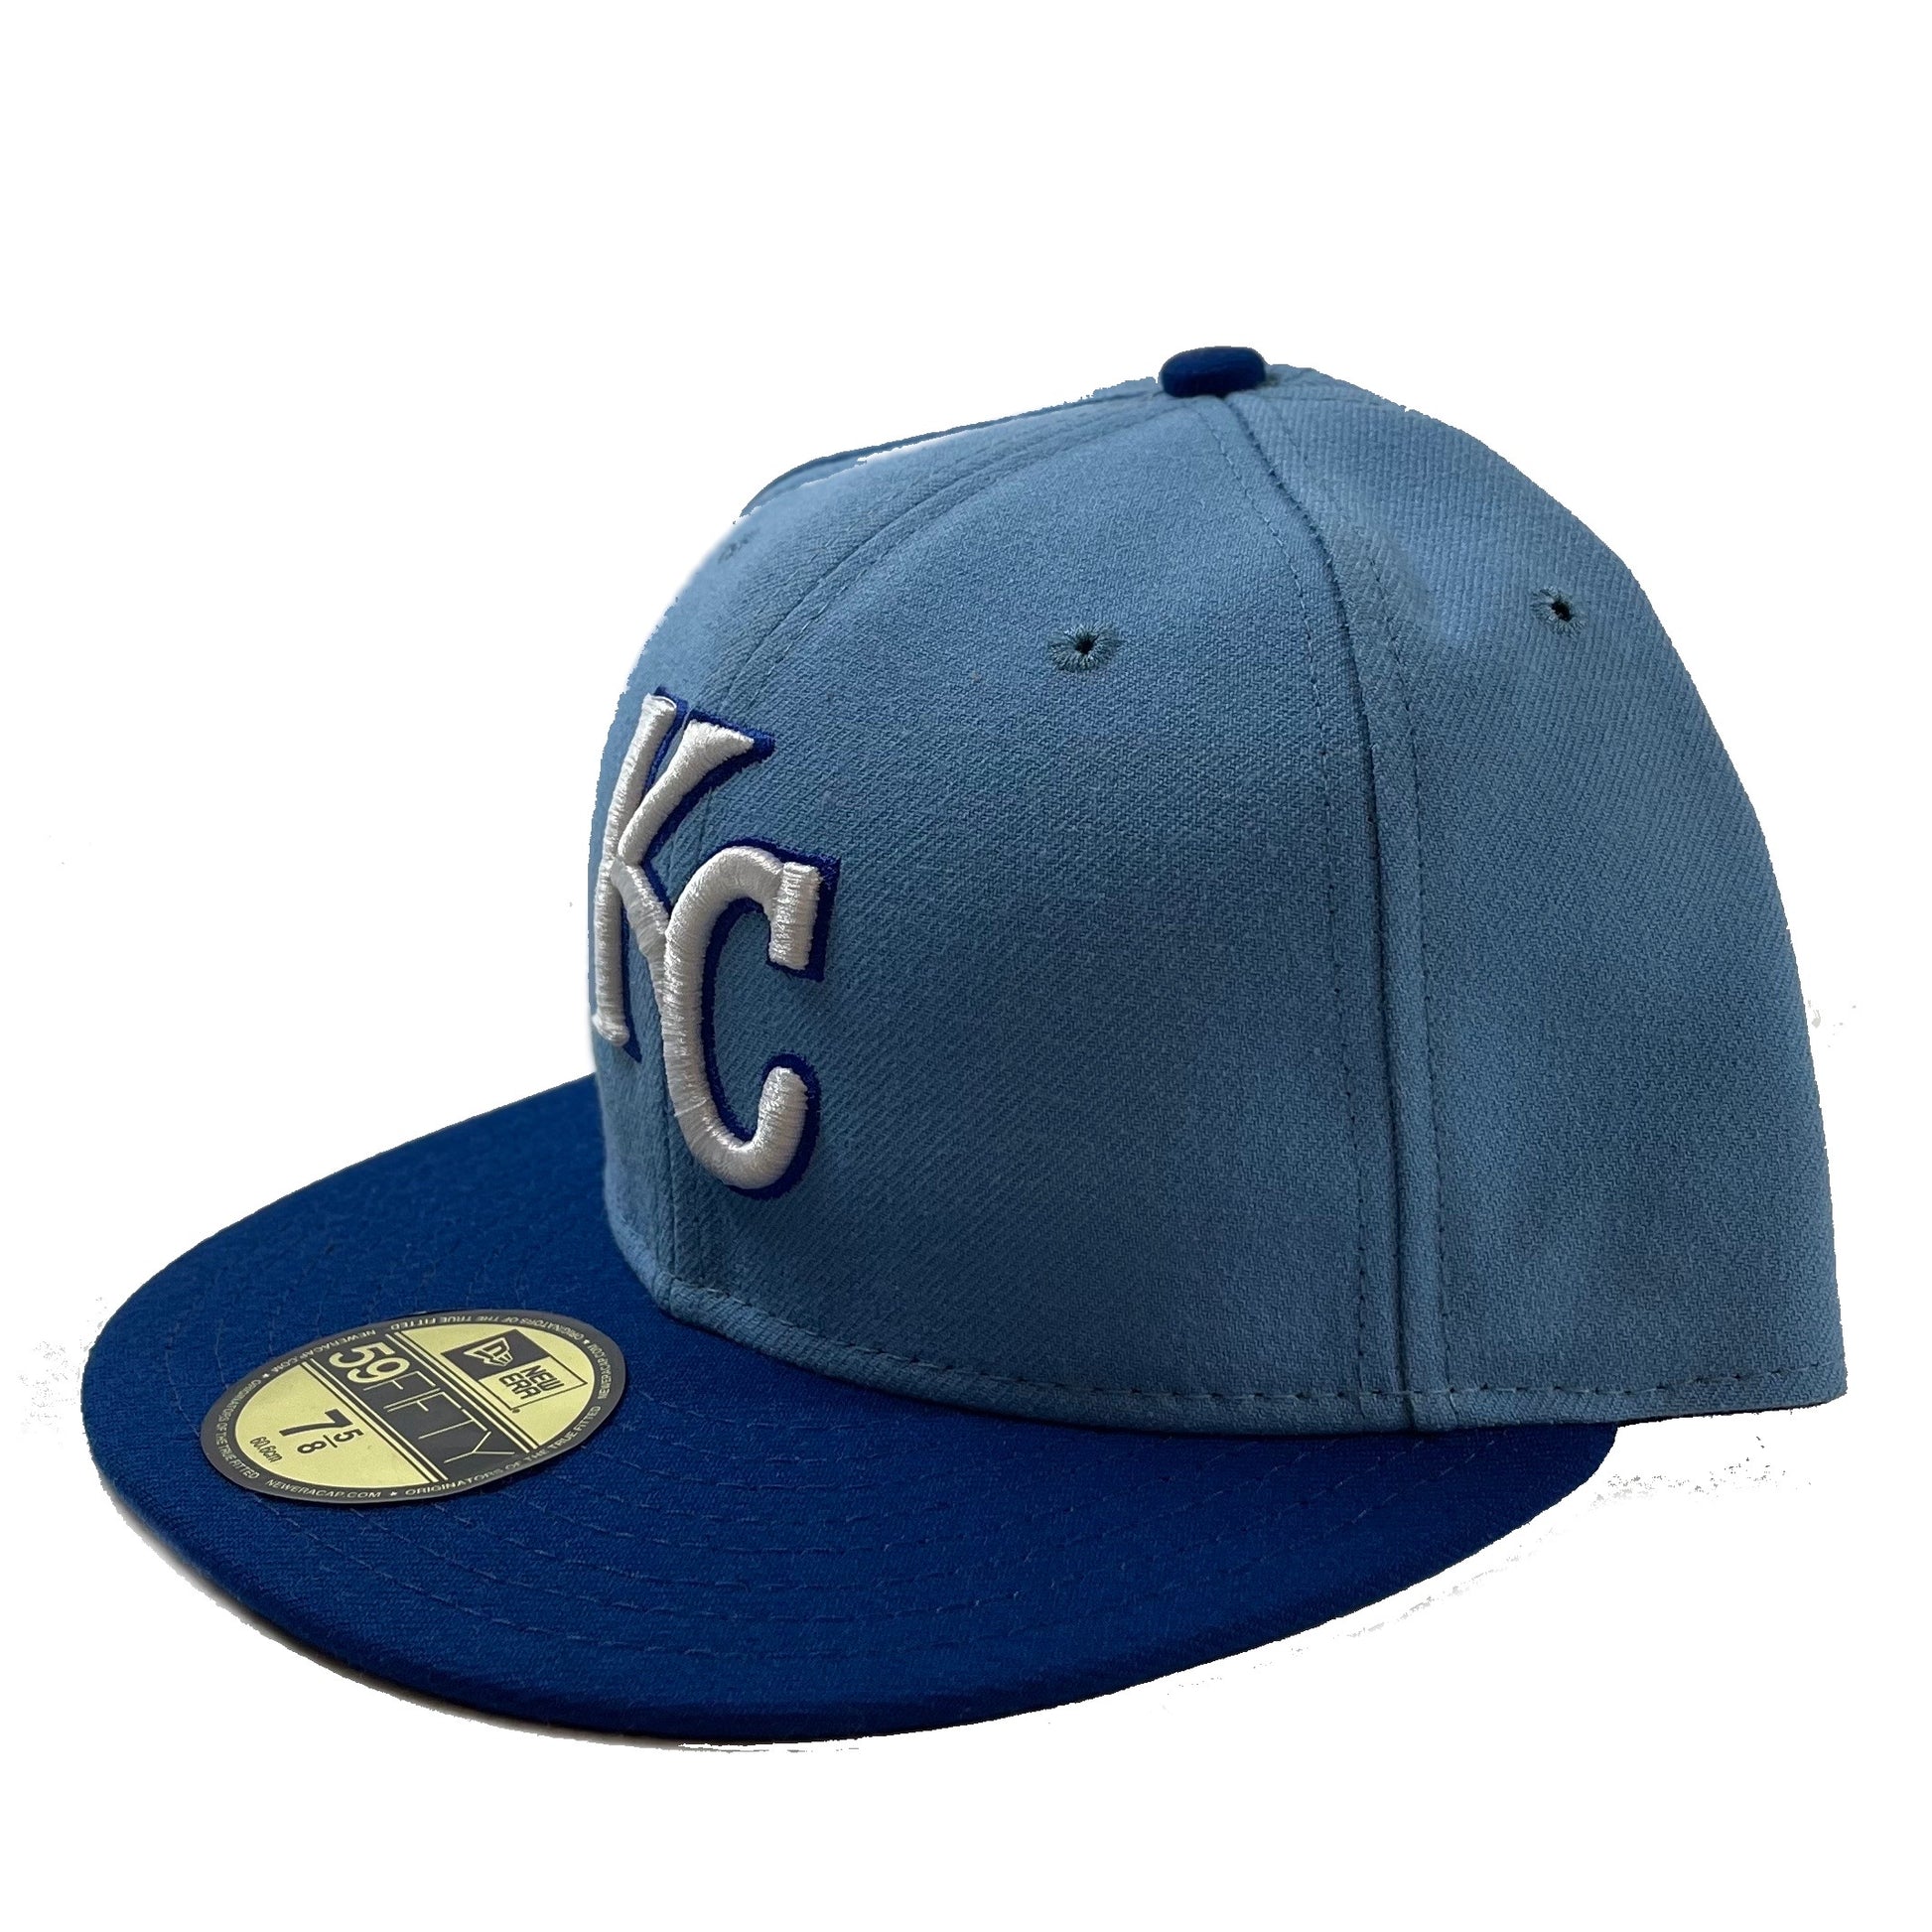 Small changes to Royals uniforms: Solid blue hat with powder blue